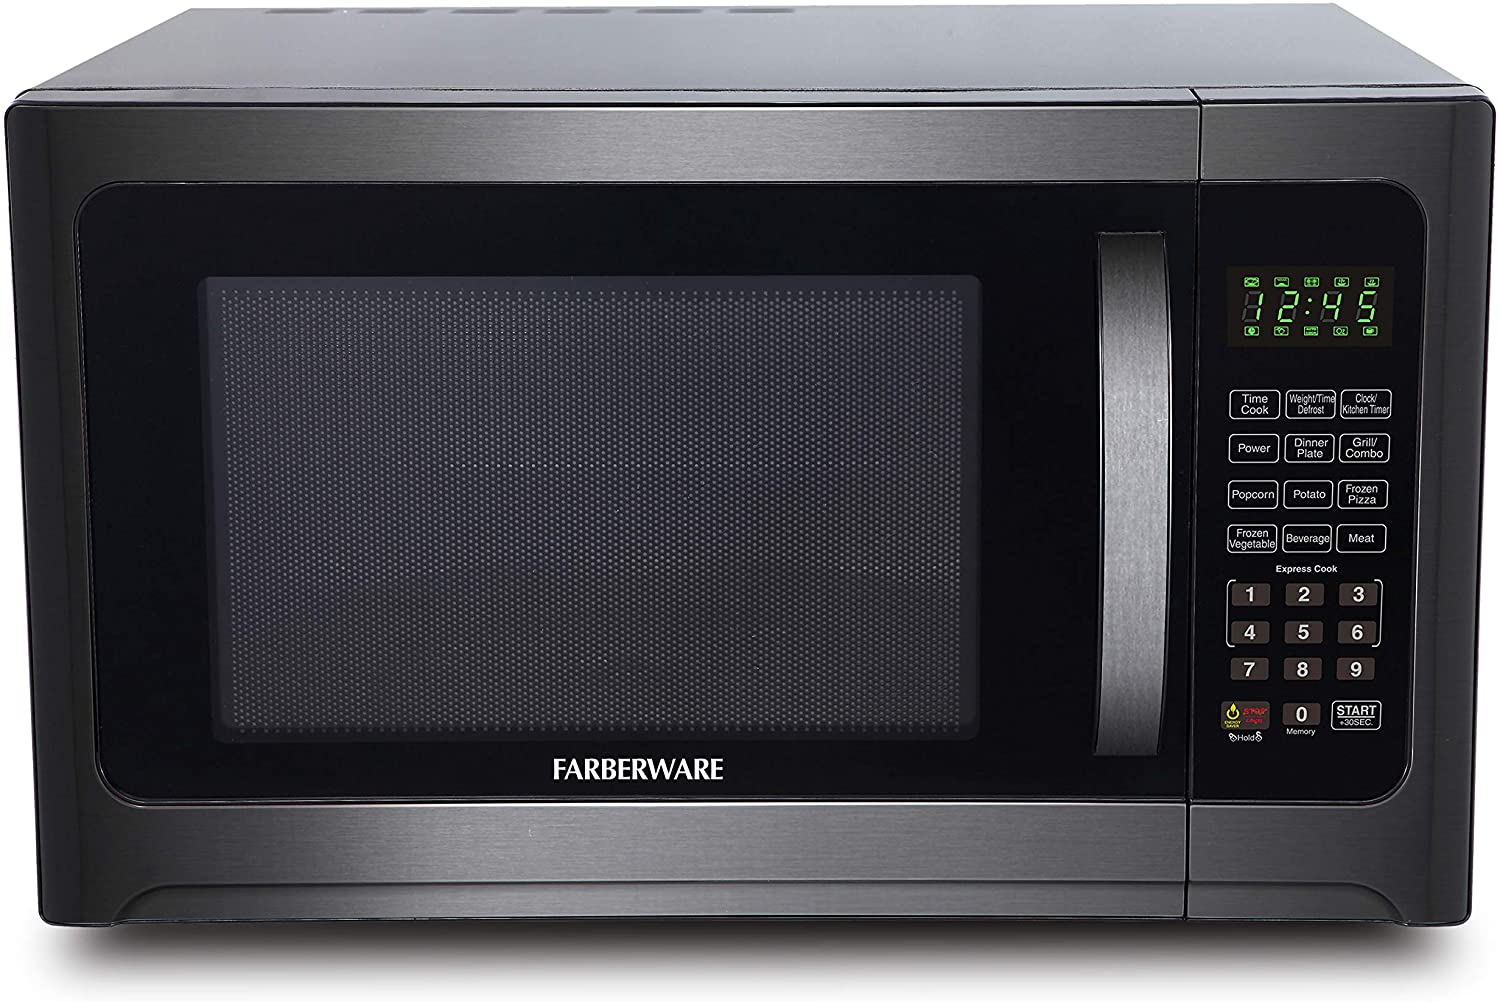 Farberware 1.2 Cu. Ft. 1100-Watt Microwave Oven with Grill, Cubic Foot, Black Stainless Steel $49.99